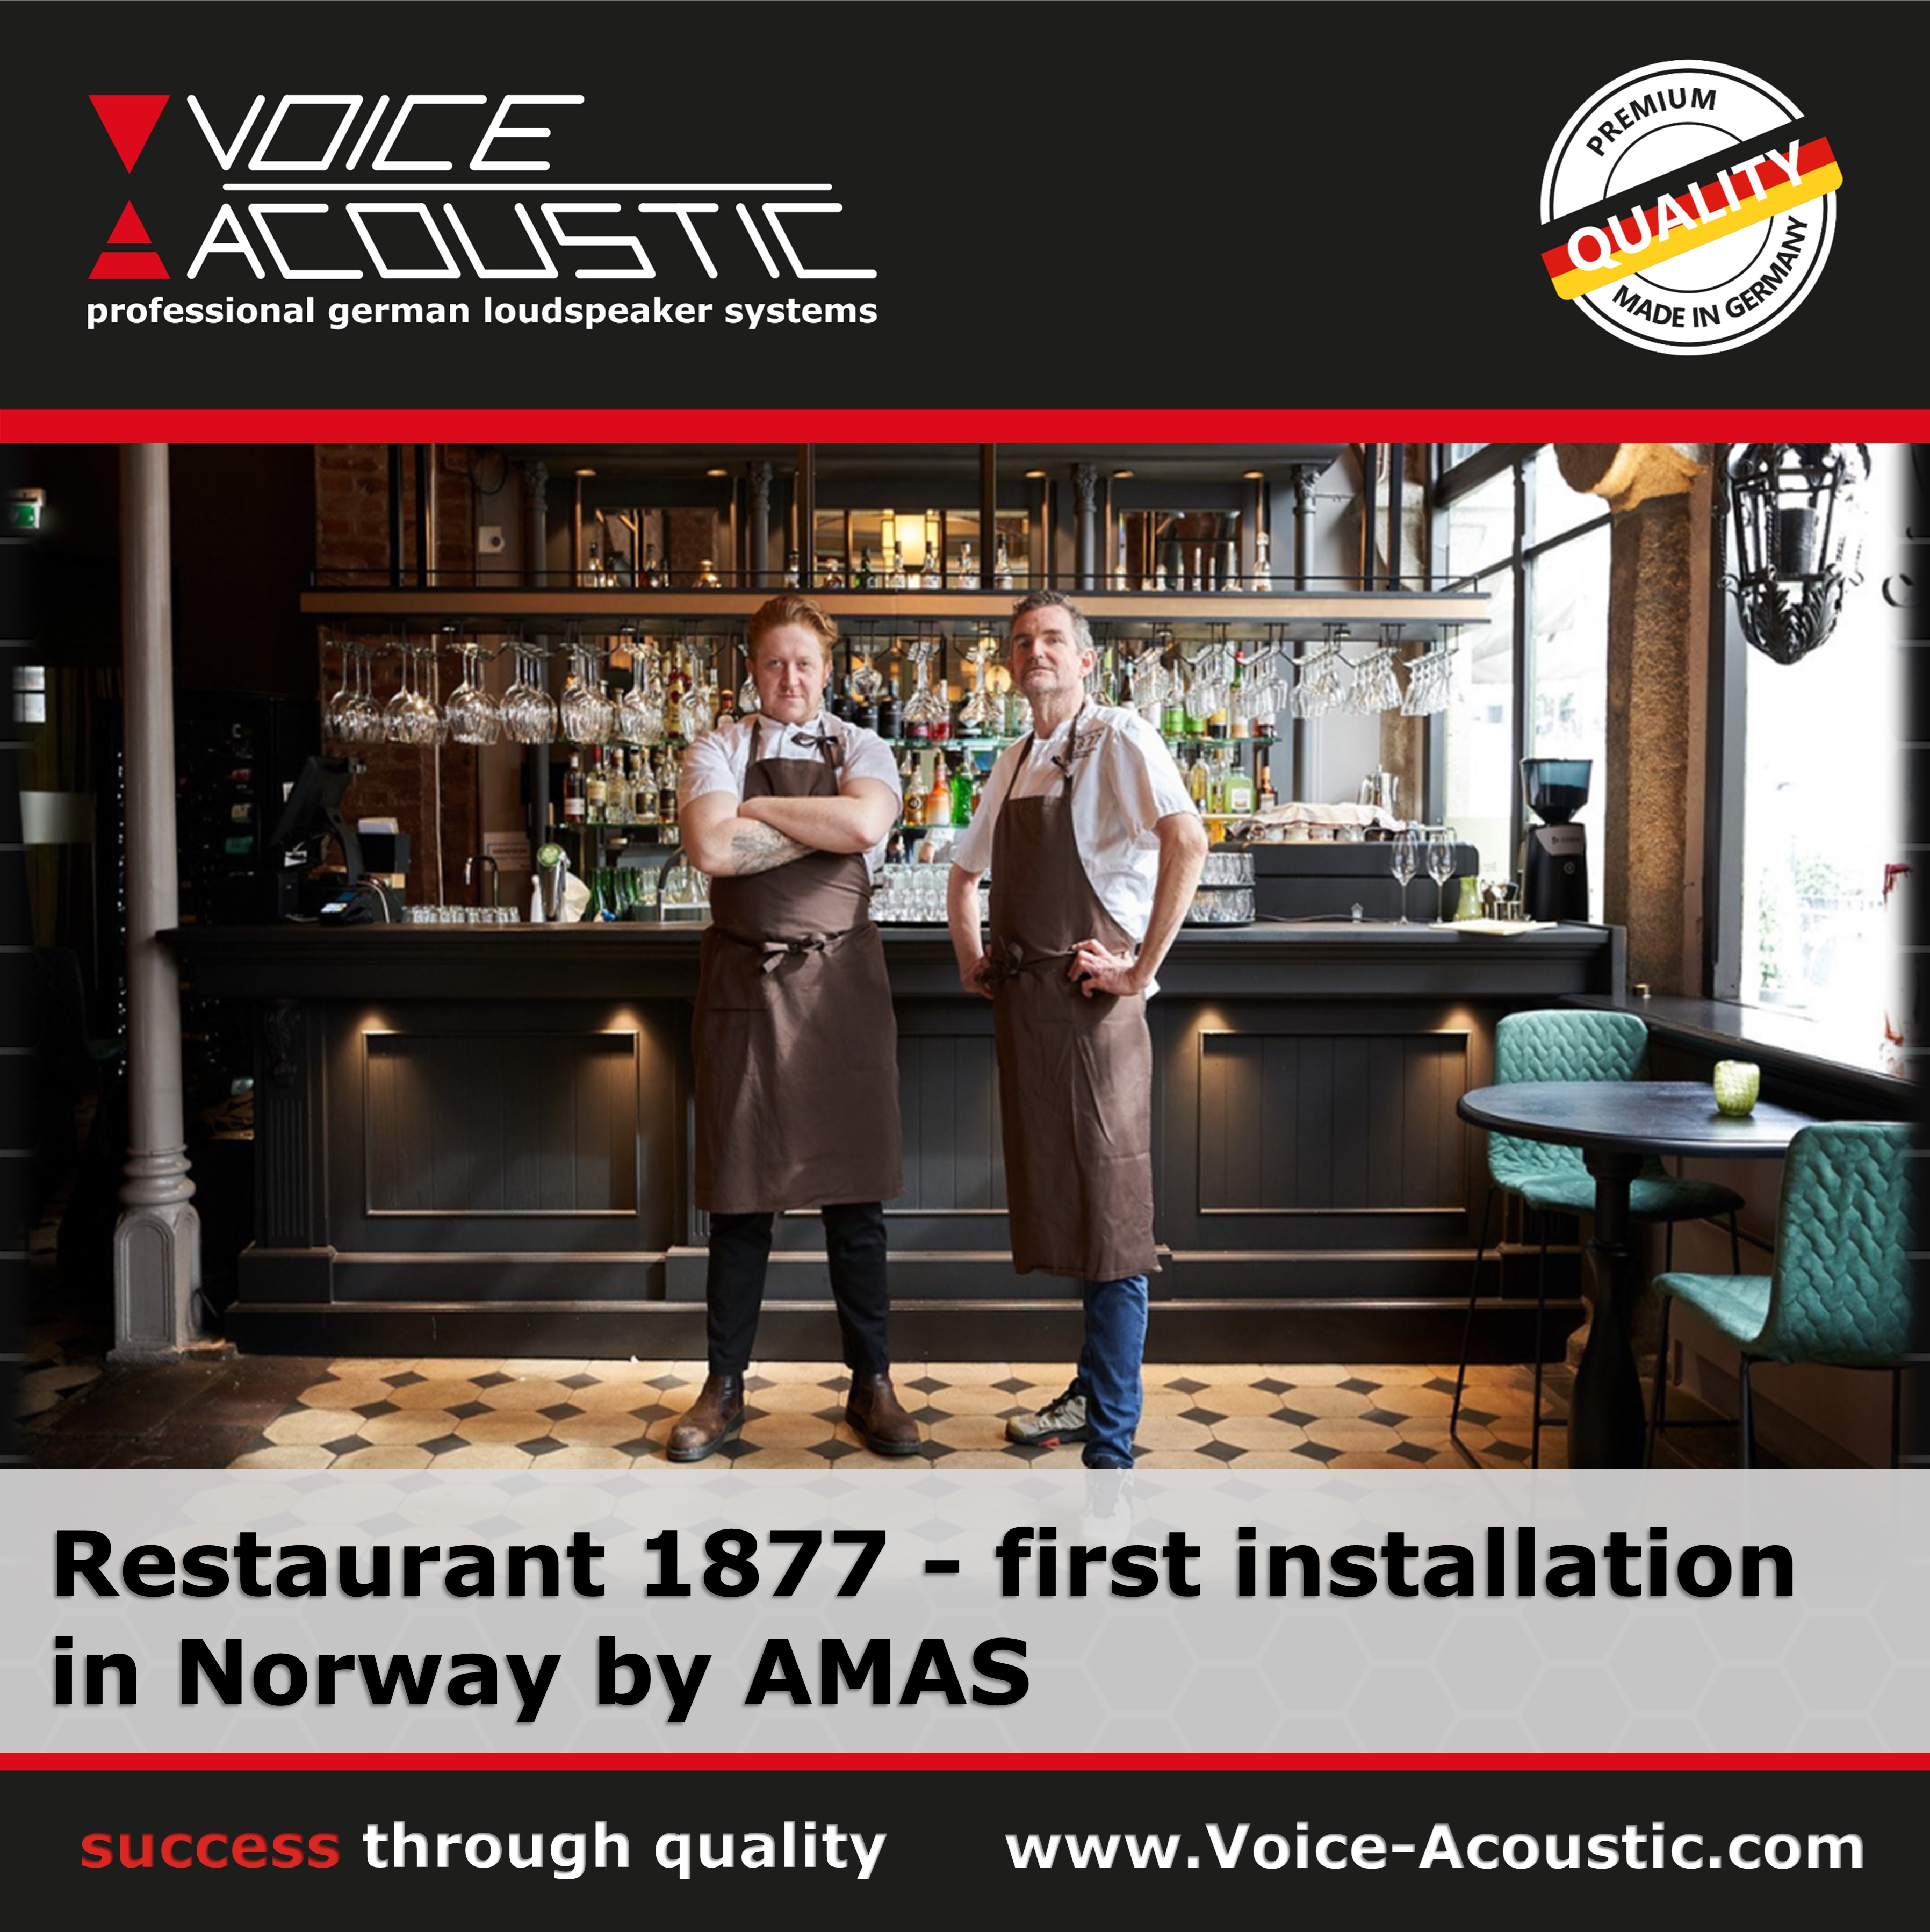 Restaurant 1877 - The first Installation in Norway by AMAS